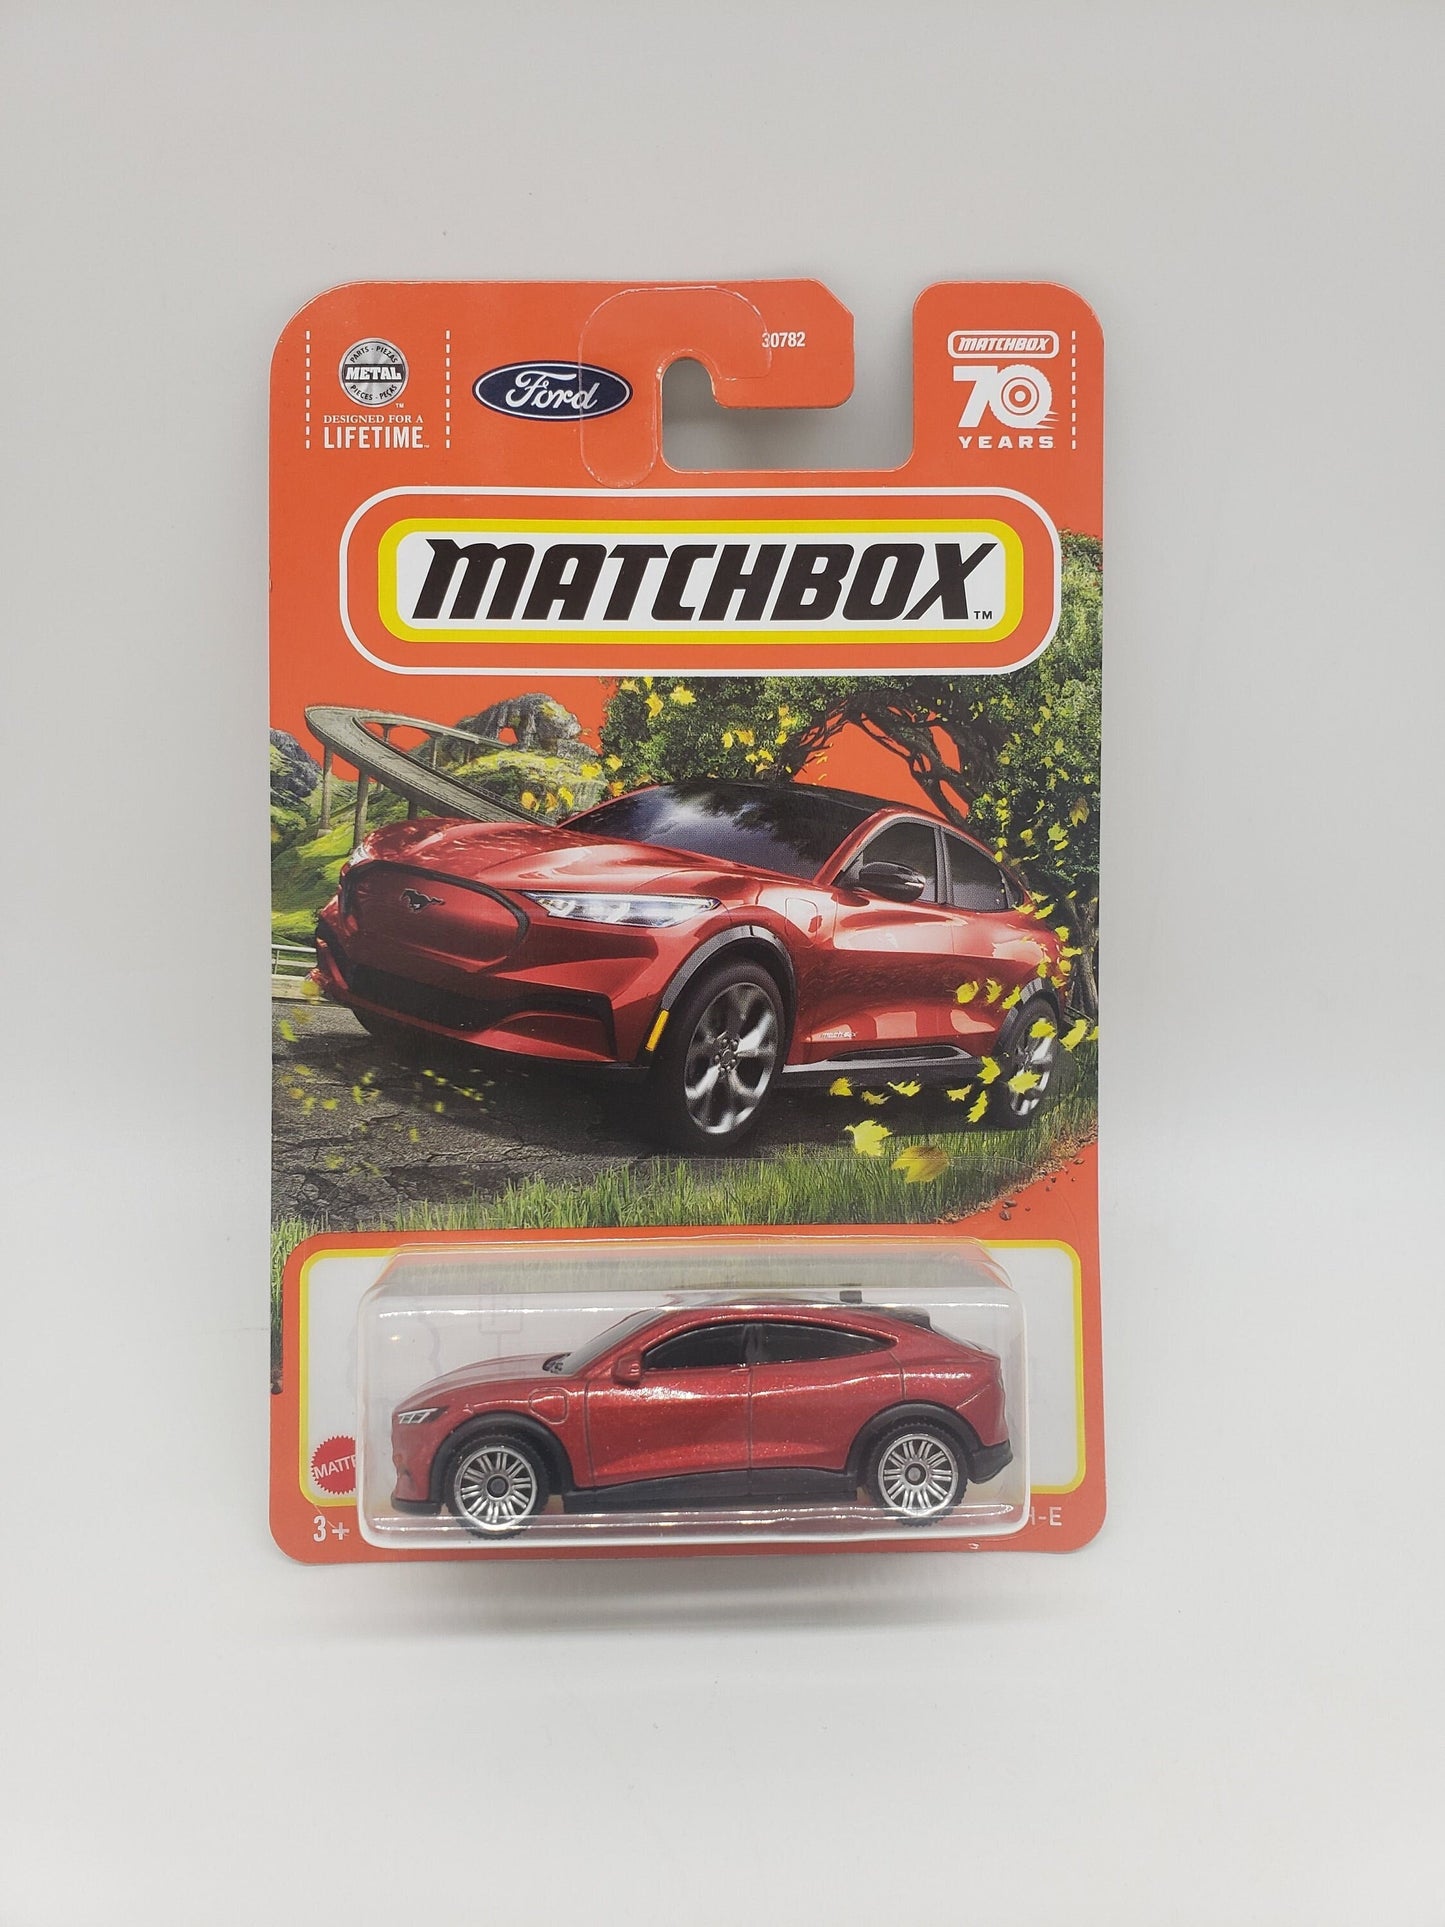 Matchbox Ford Mustang Mach-E Red Collectable Scale Model Miniature Toy Car Perfect Birthday Gift